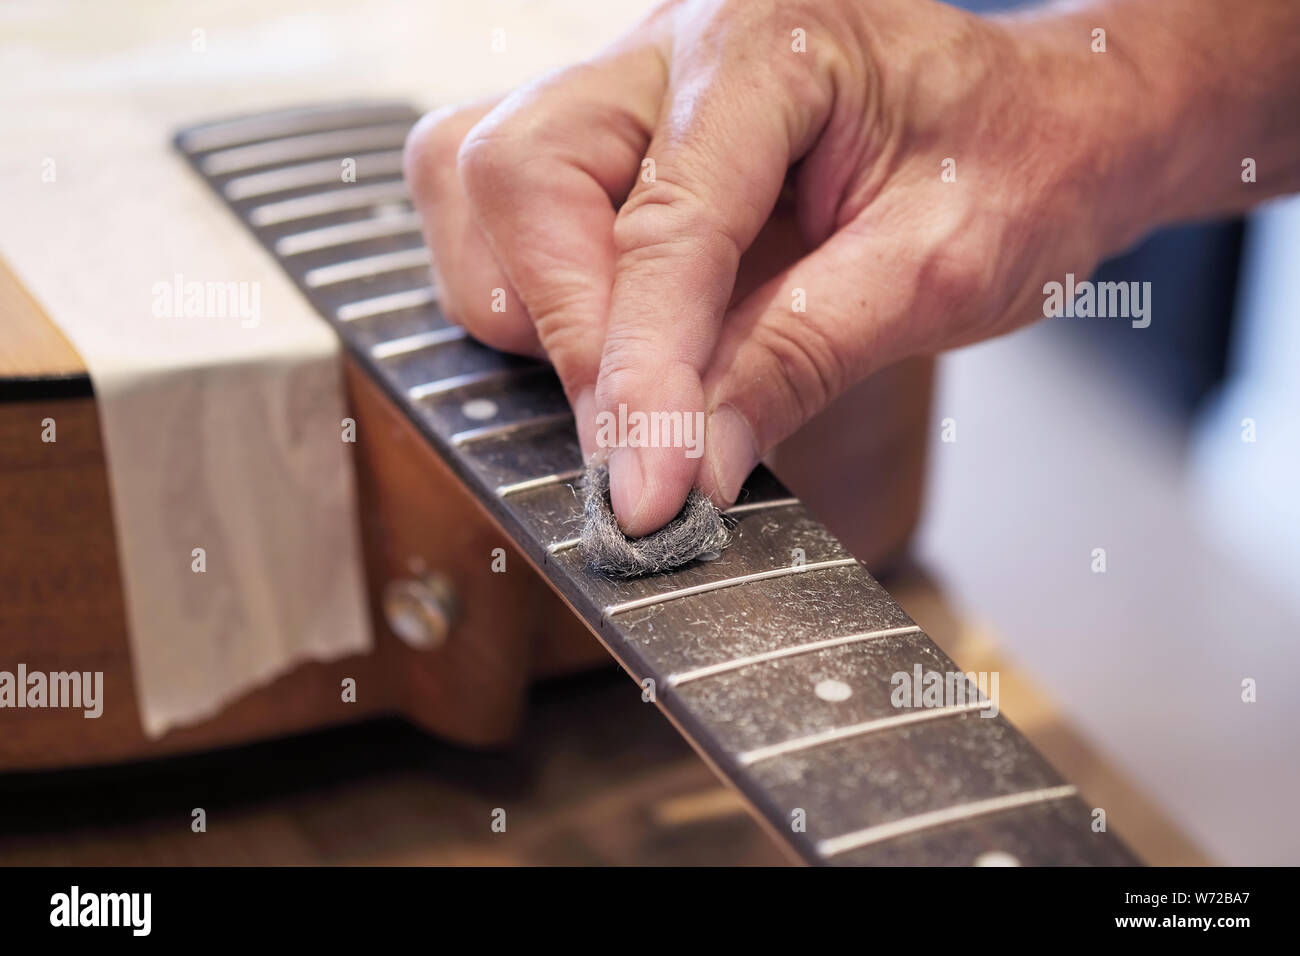 An acoustic guitar being serviced. The technician is Cleaning the fret board with fine wire wool Stock Photo